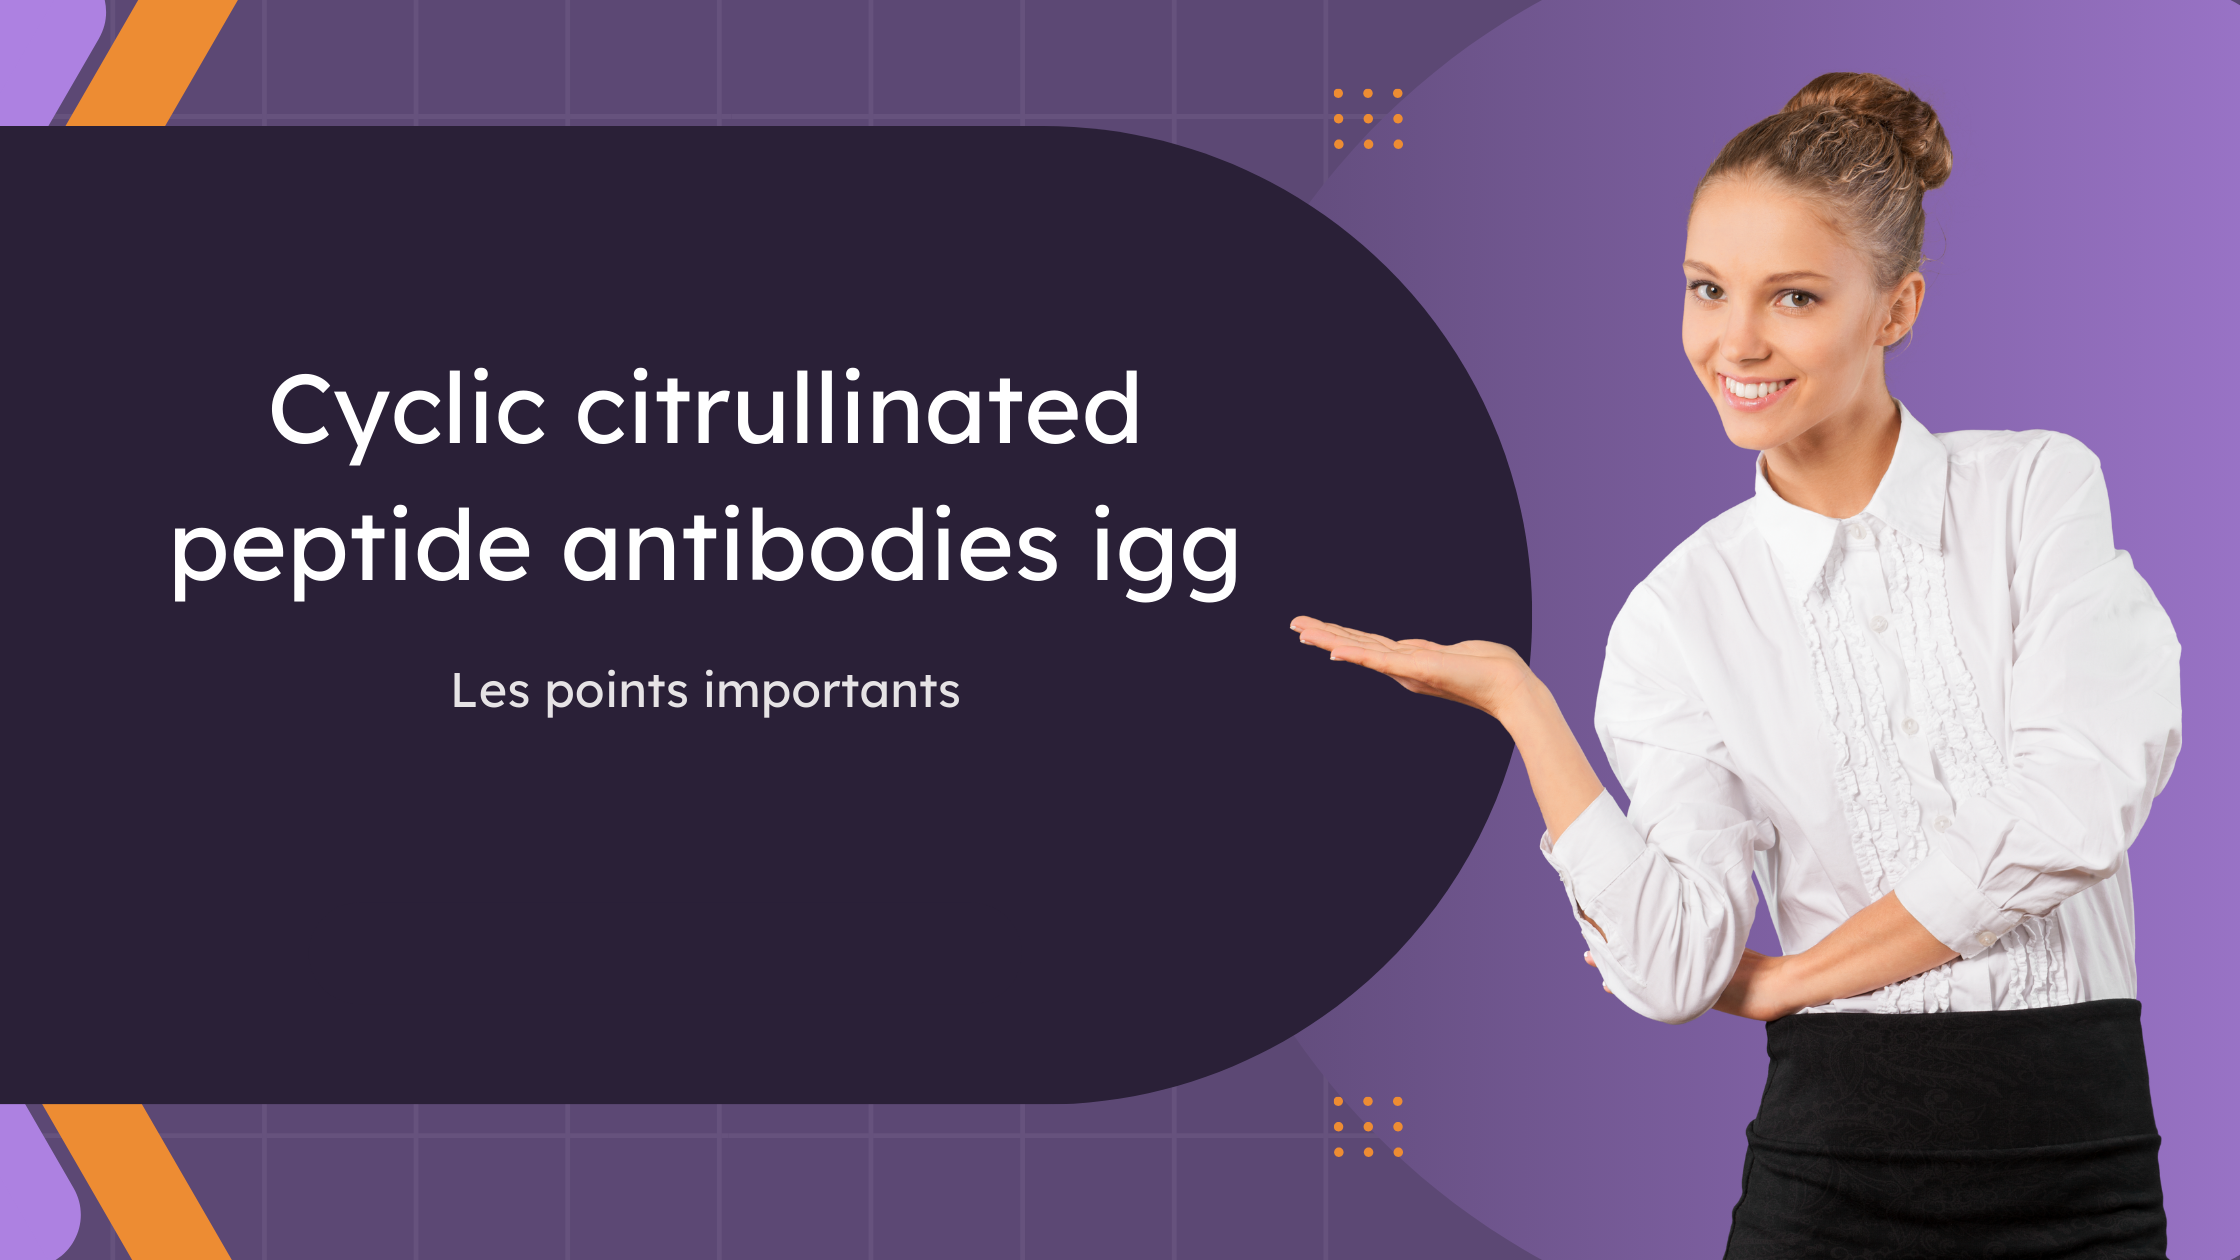 Cyclic citrullinated peptide antibodies igg | Les points importants